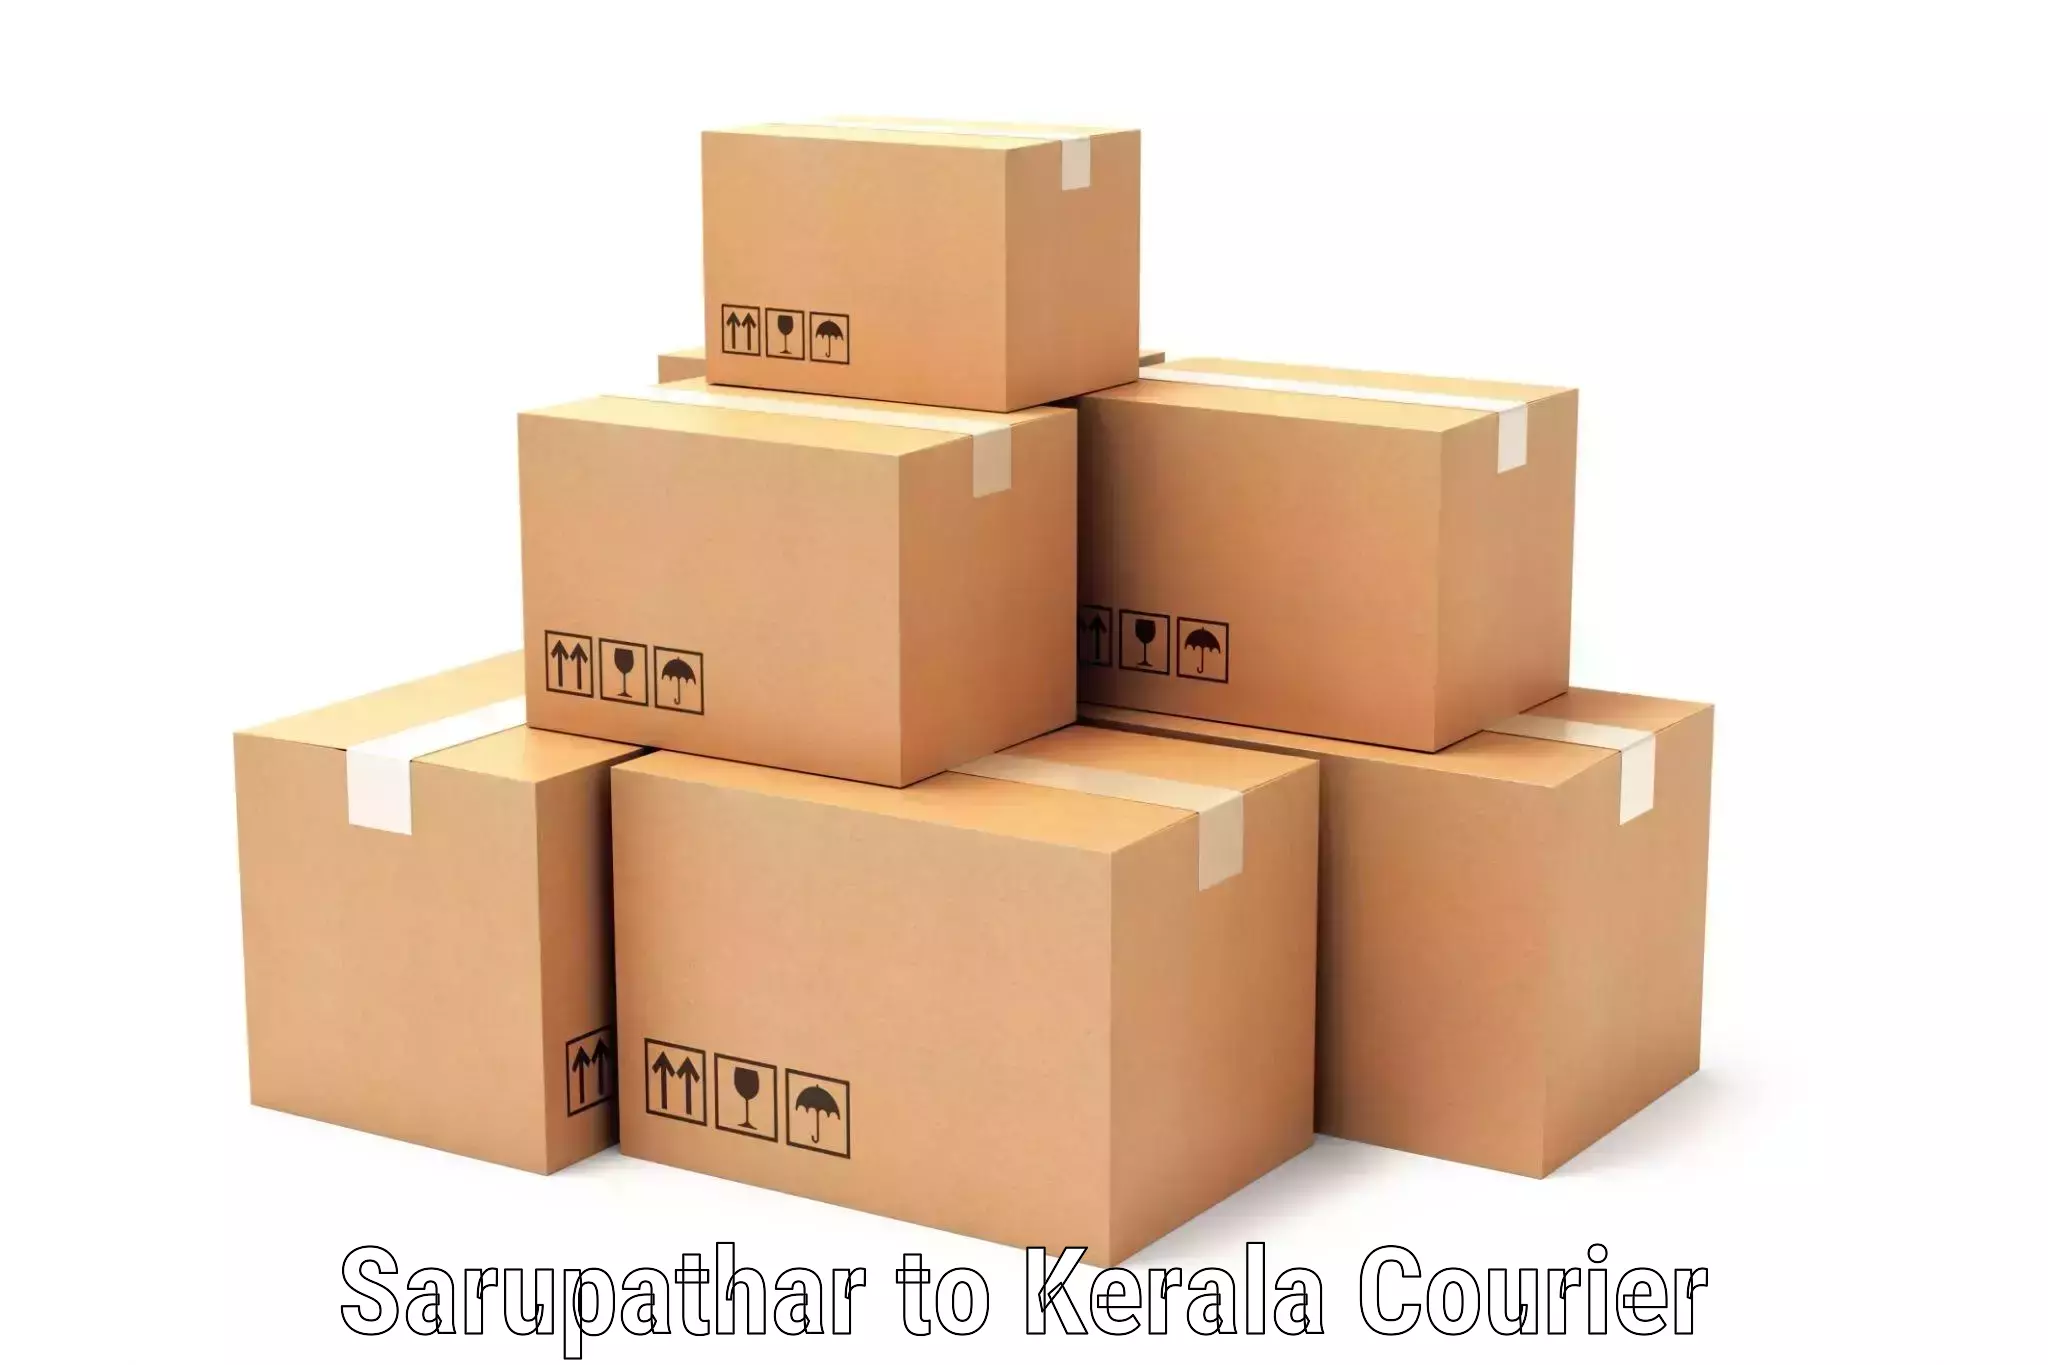 Global shipping solutions in Sarupathar to Kerala